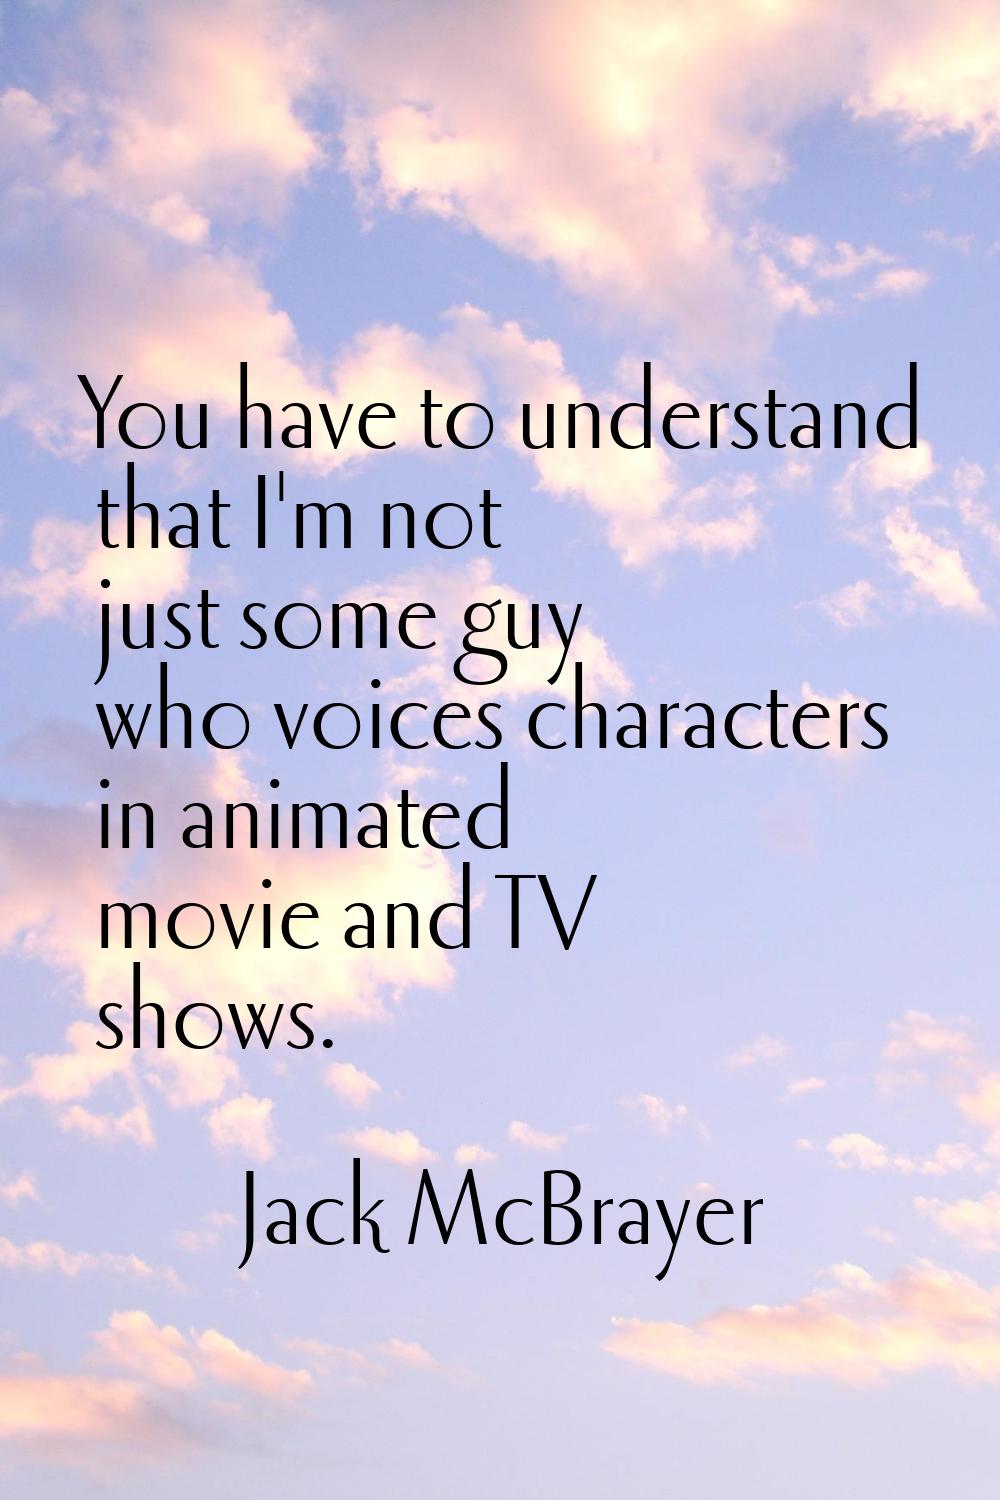 You have to understand that I'm not just some guy who voices characters in animated movie and TV sh